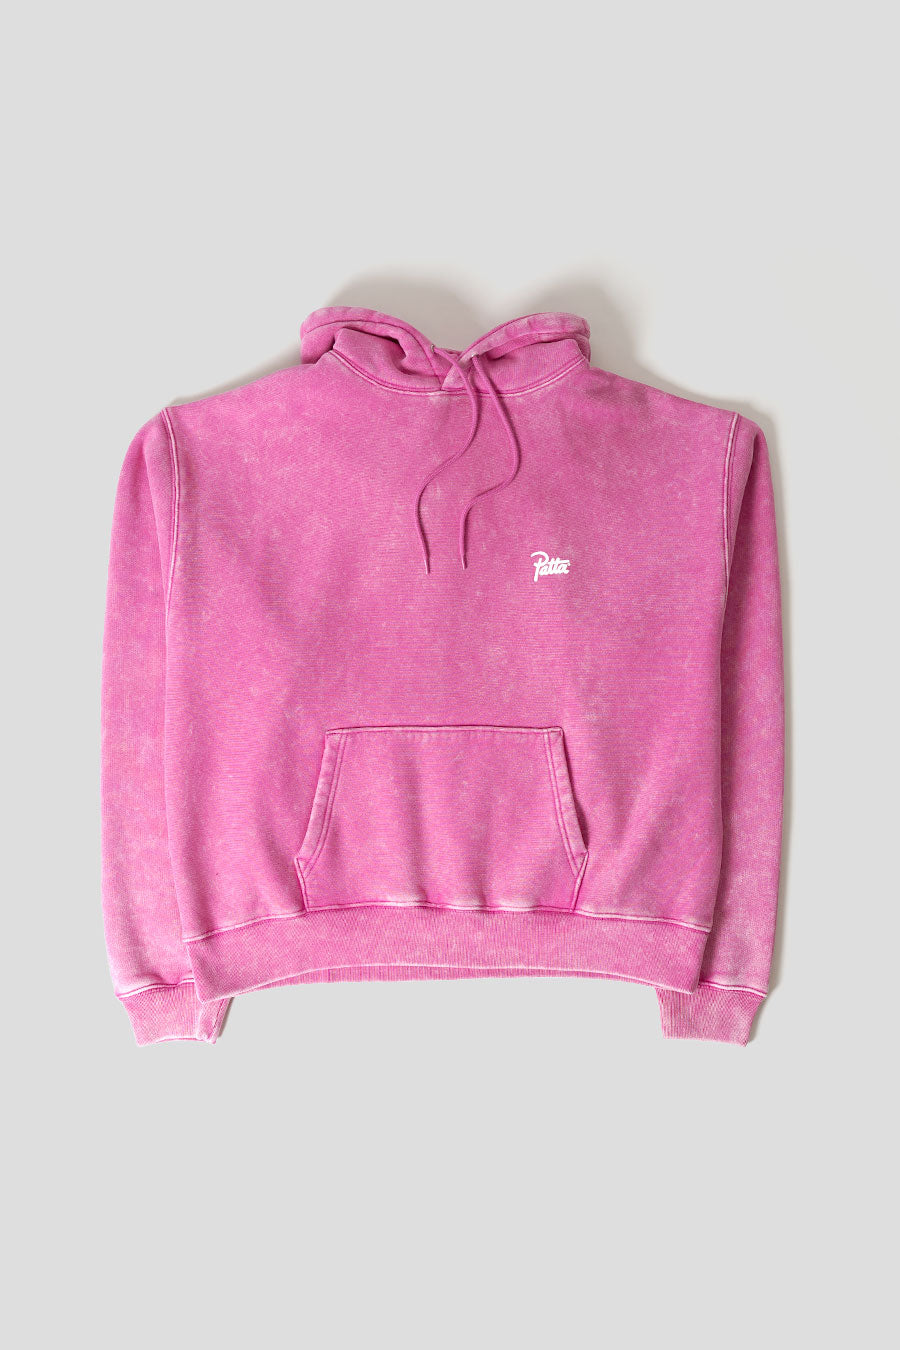 Patta - HOODIE CLASSIC WASHED ROSE - LE LABO STORE